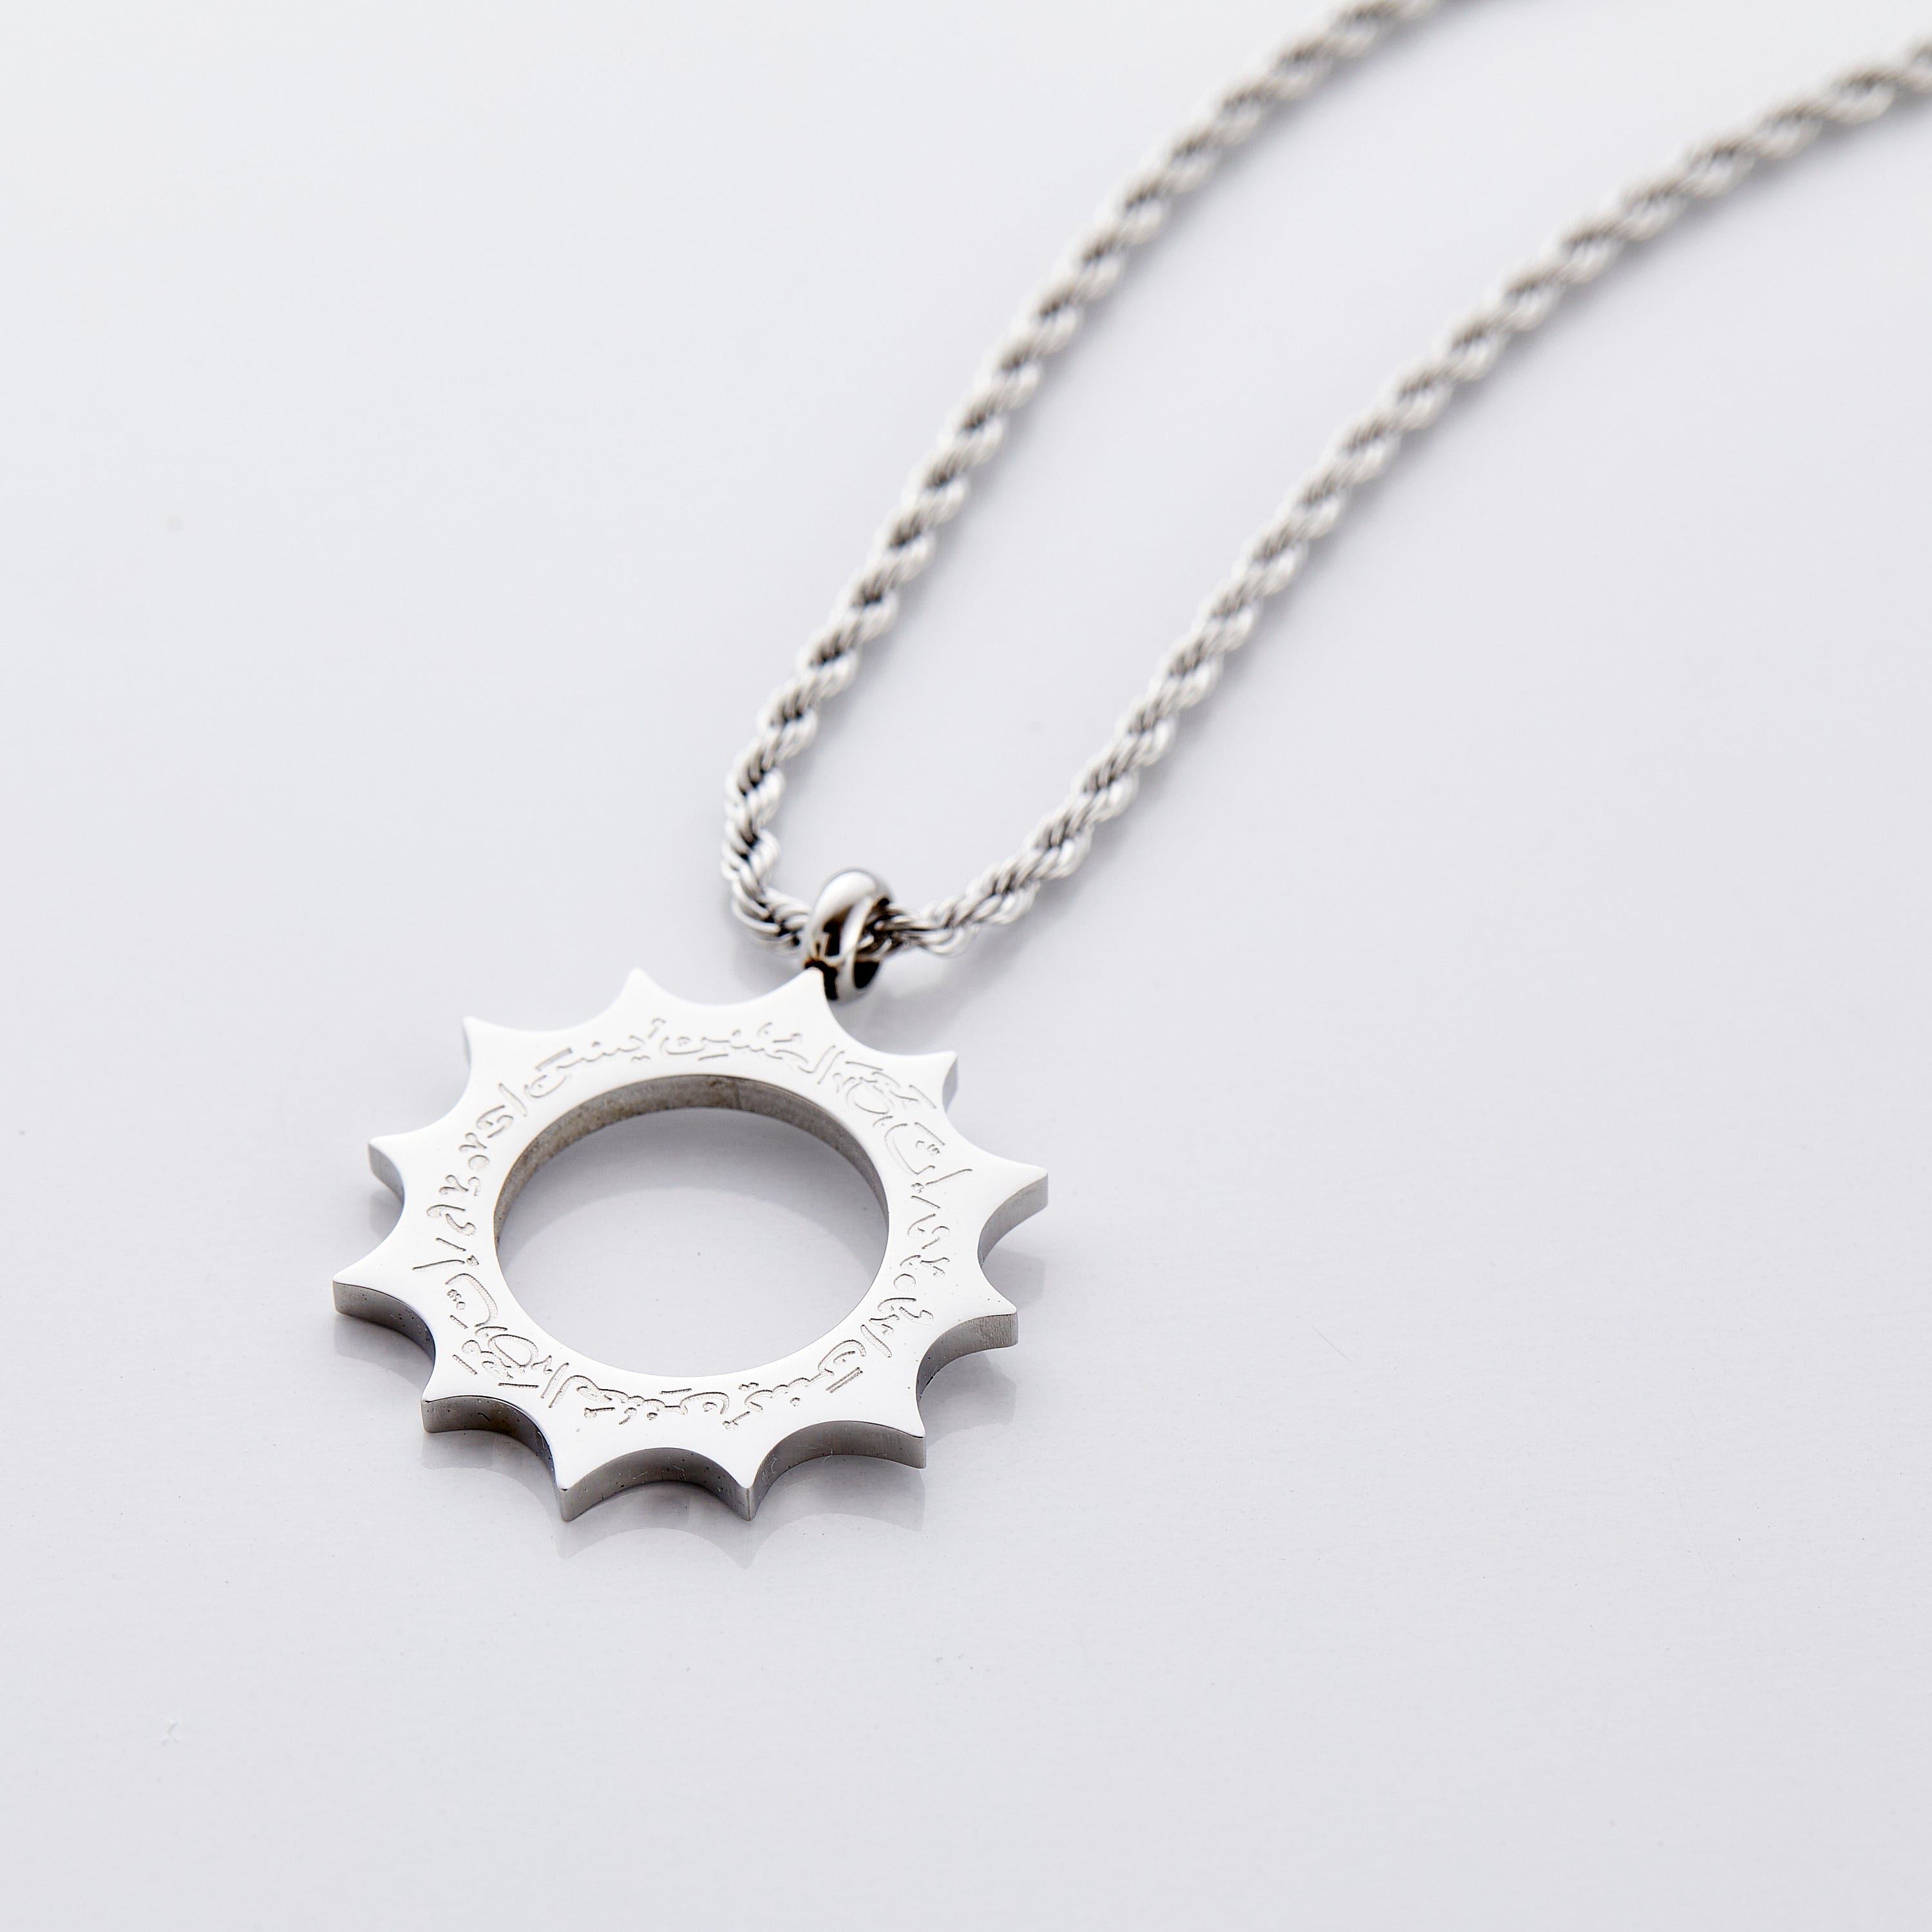 'With Hardship Comes Ease' Sun Necklace - Nominal